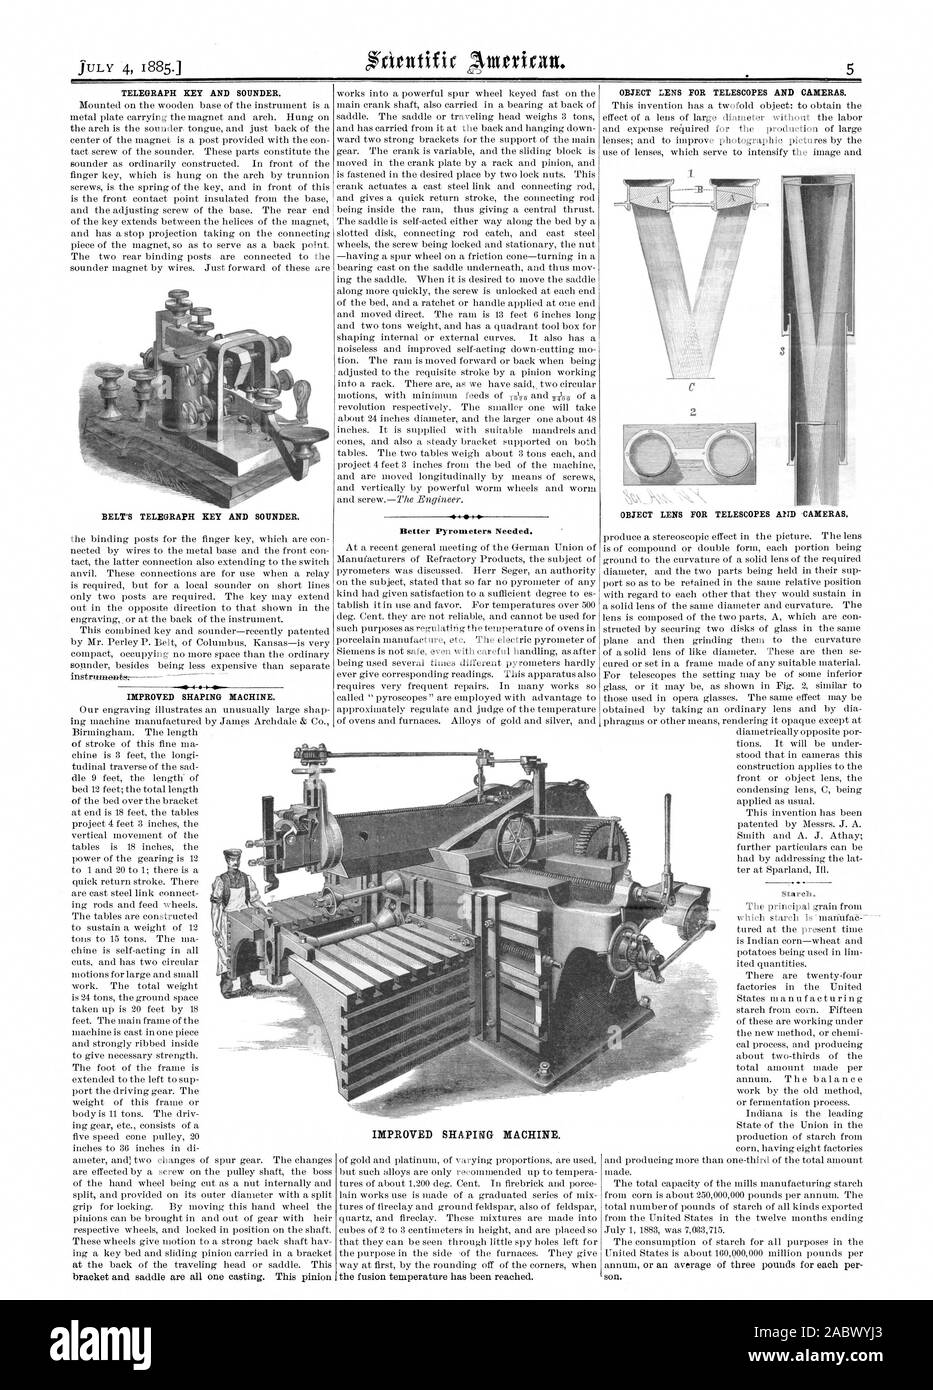 TELEGRAPH KEY AND SOUNDER. BELT'S TELEGRAPH KEY AND SOUNDER. 1 1 . IMPROVED SHAPING MACHINE. Better Pyrometers Needed. IMPROVED SHAPING MACHINE. OBjECT LENS FOR TELESCOPES AND CAMERAS. Starch. OBJECT LENS FOR TELESCOPES AND CAMERAS., scientific american, 1885-07-04 Stock Photo